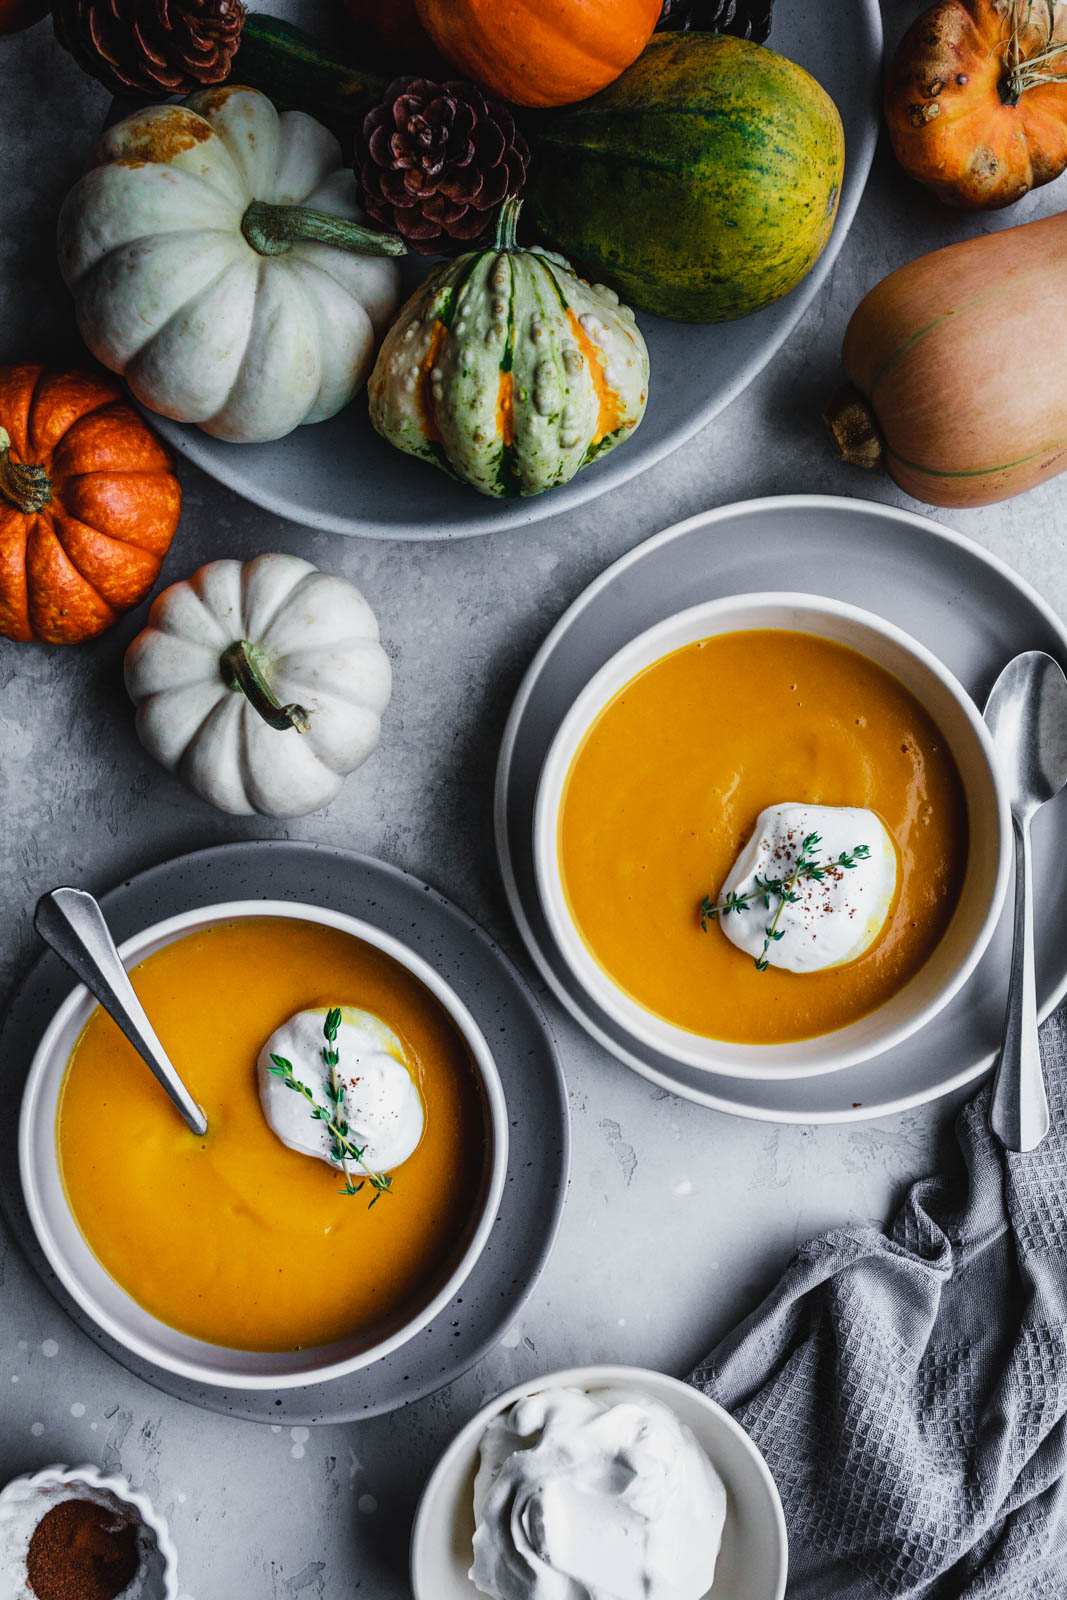 https://www.oliveandmango.com/images/uploads/2018_10_15_classic_butternut_soup_with_spiced_whipped_cream_10.jpg